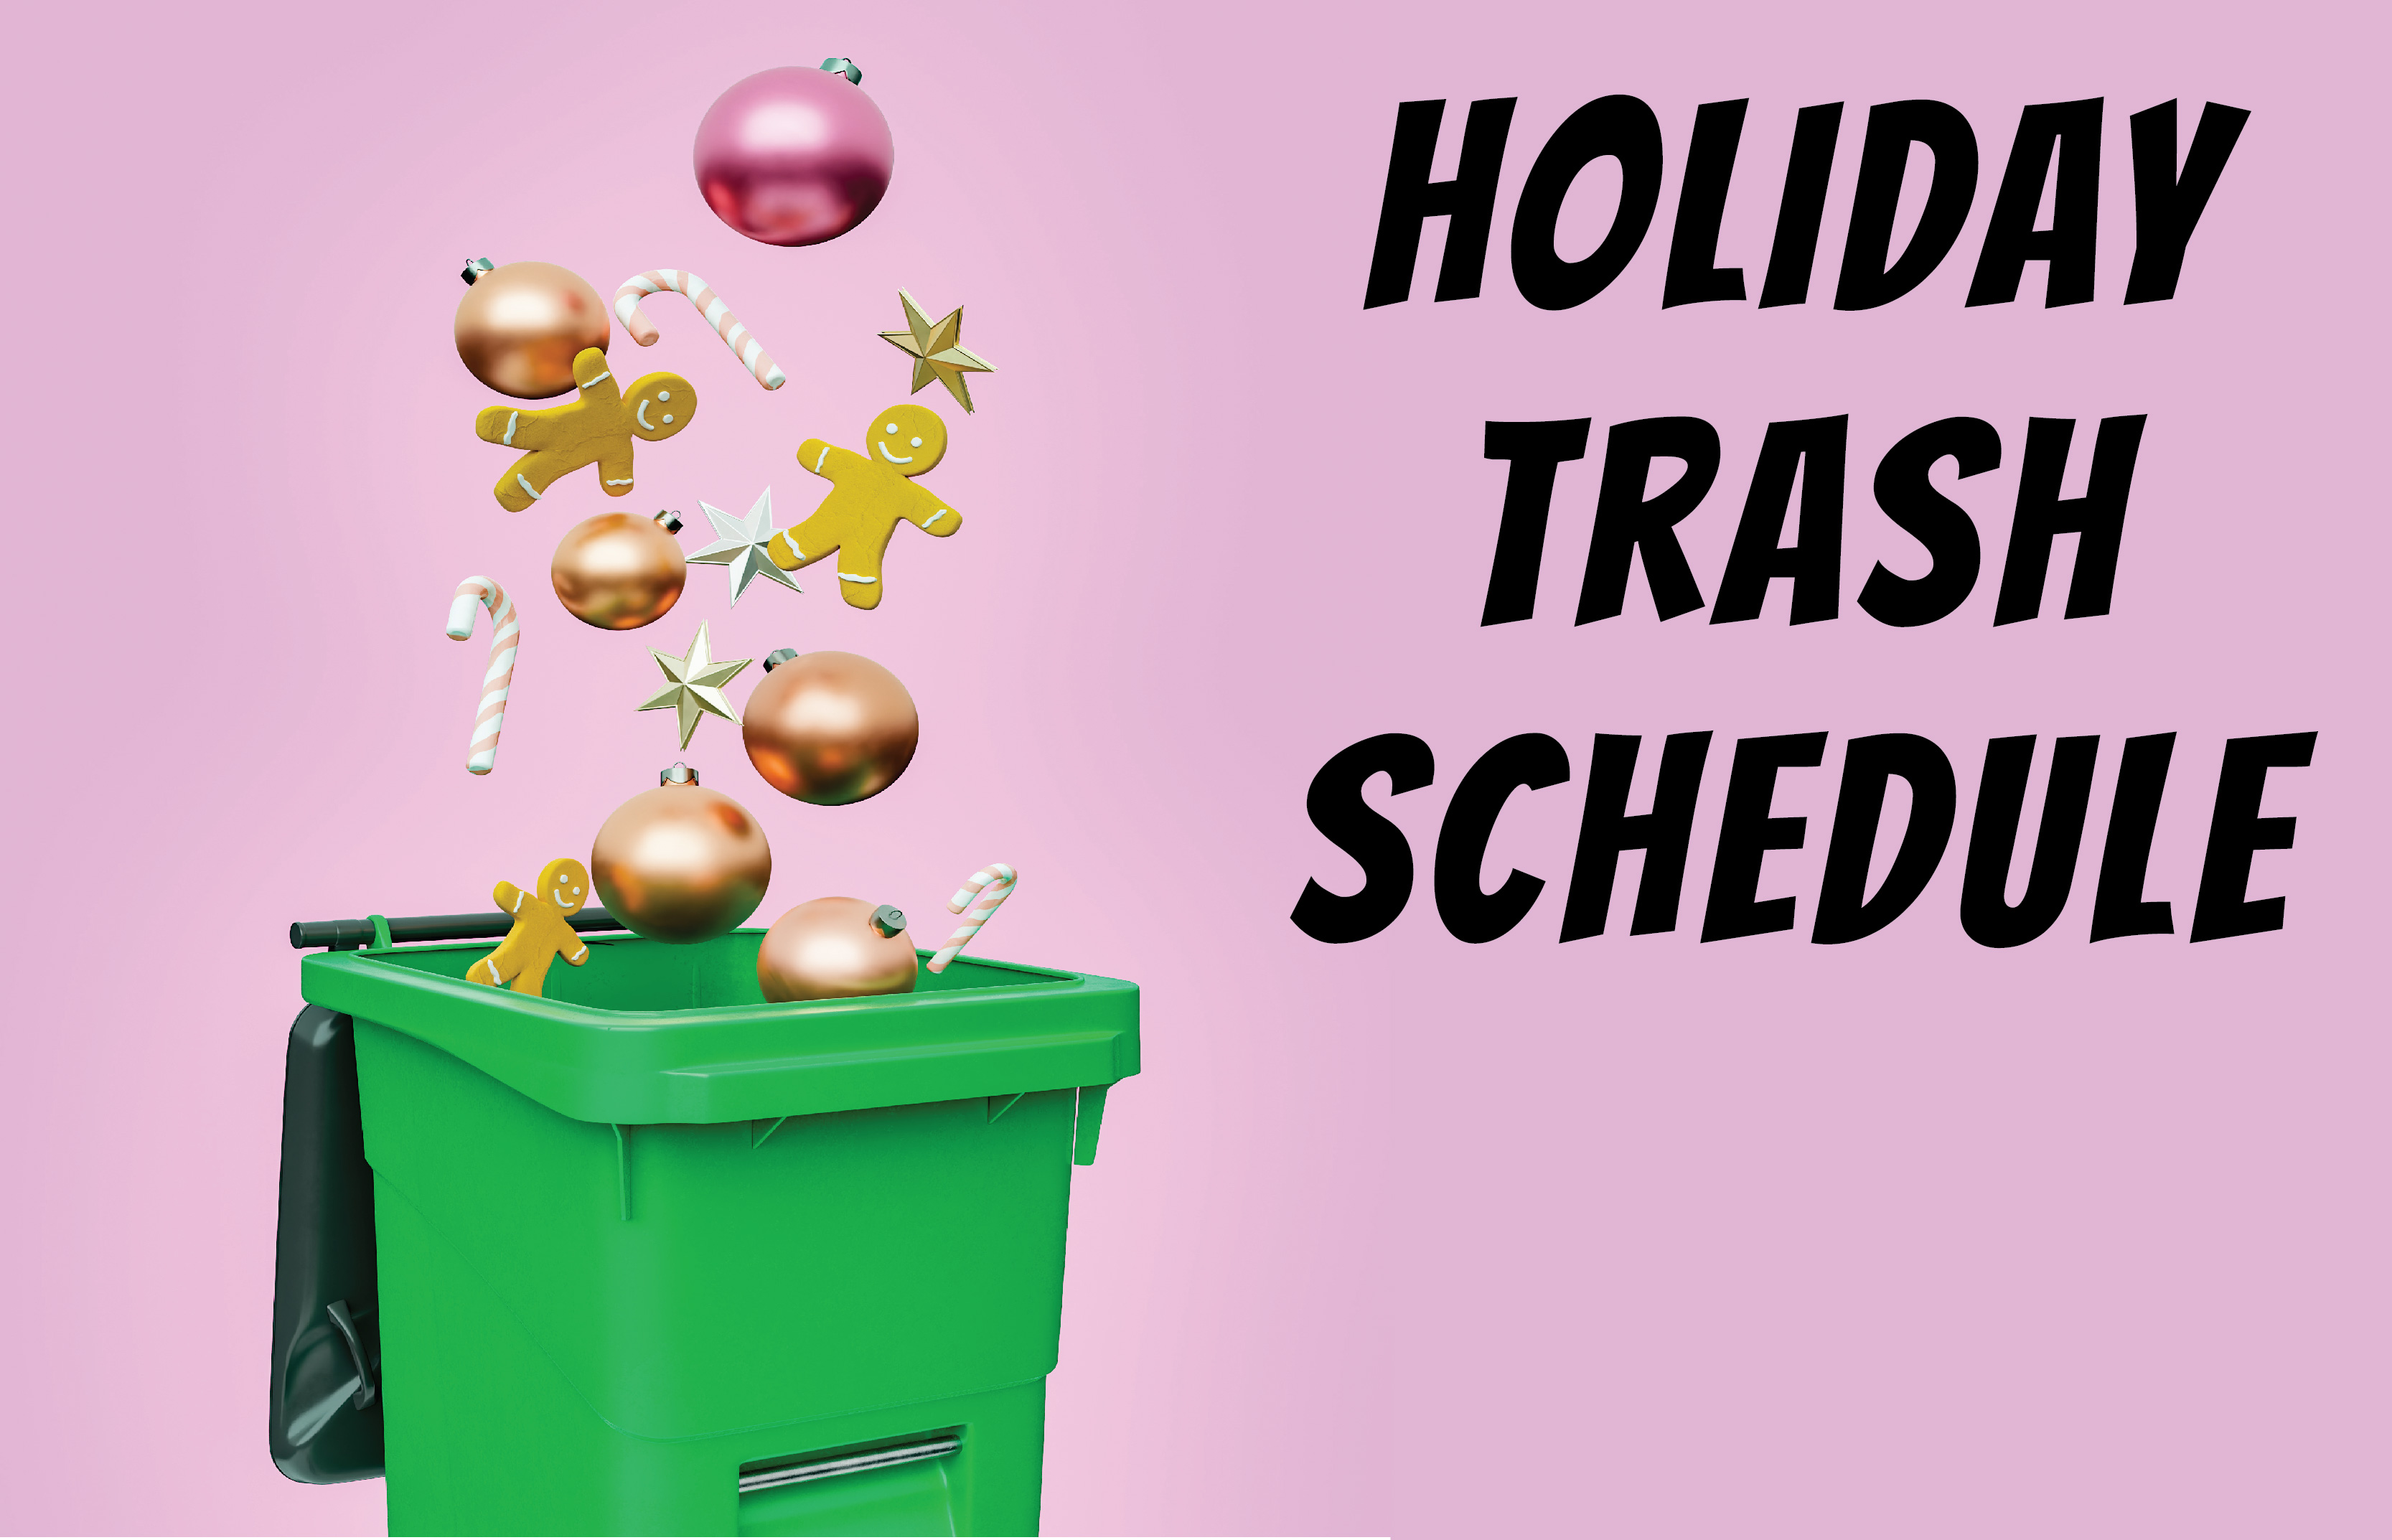 Trash Service Over the Holidays in Westfield